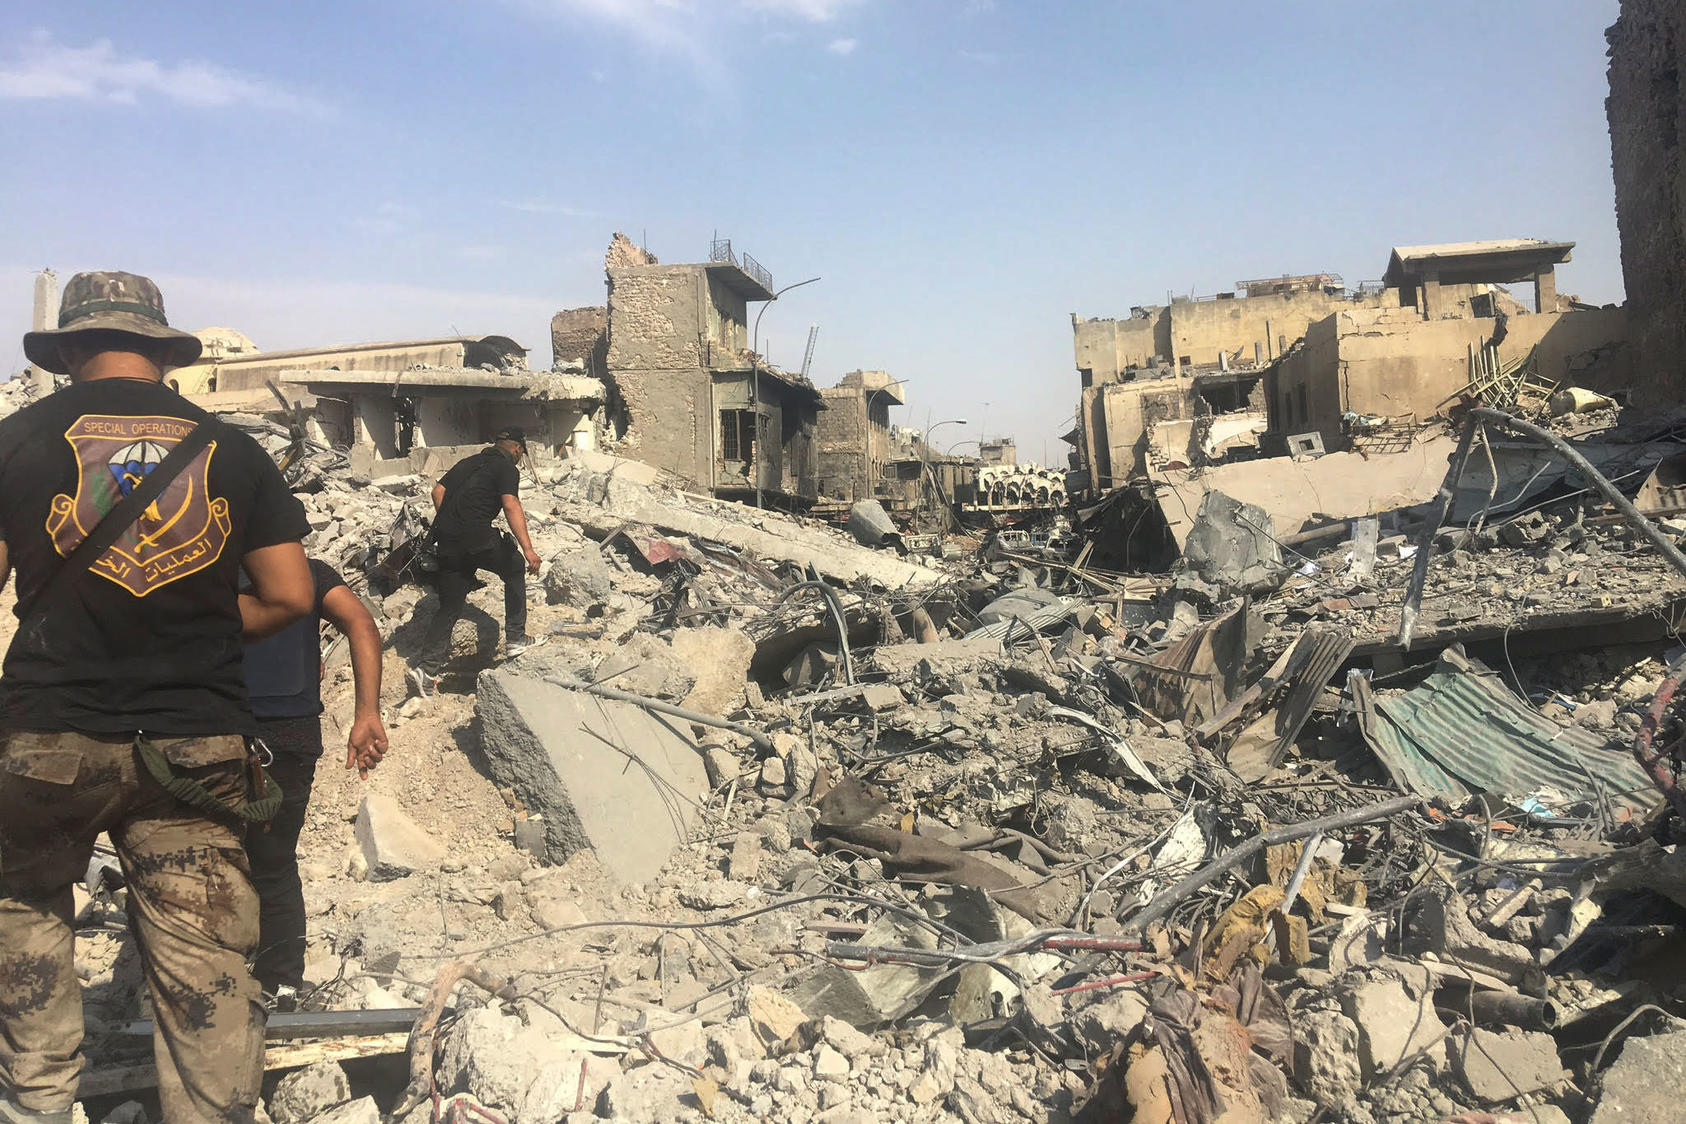 Soldiers pick their way through the ruins of Mosul, Iraq, July 11, 2017. Though Iraq officially declared victory over the Islamic State in Mosul on Sunday, a day later artillery fire could be heard in pockets of the city. 